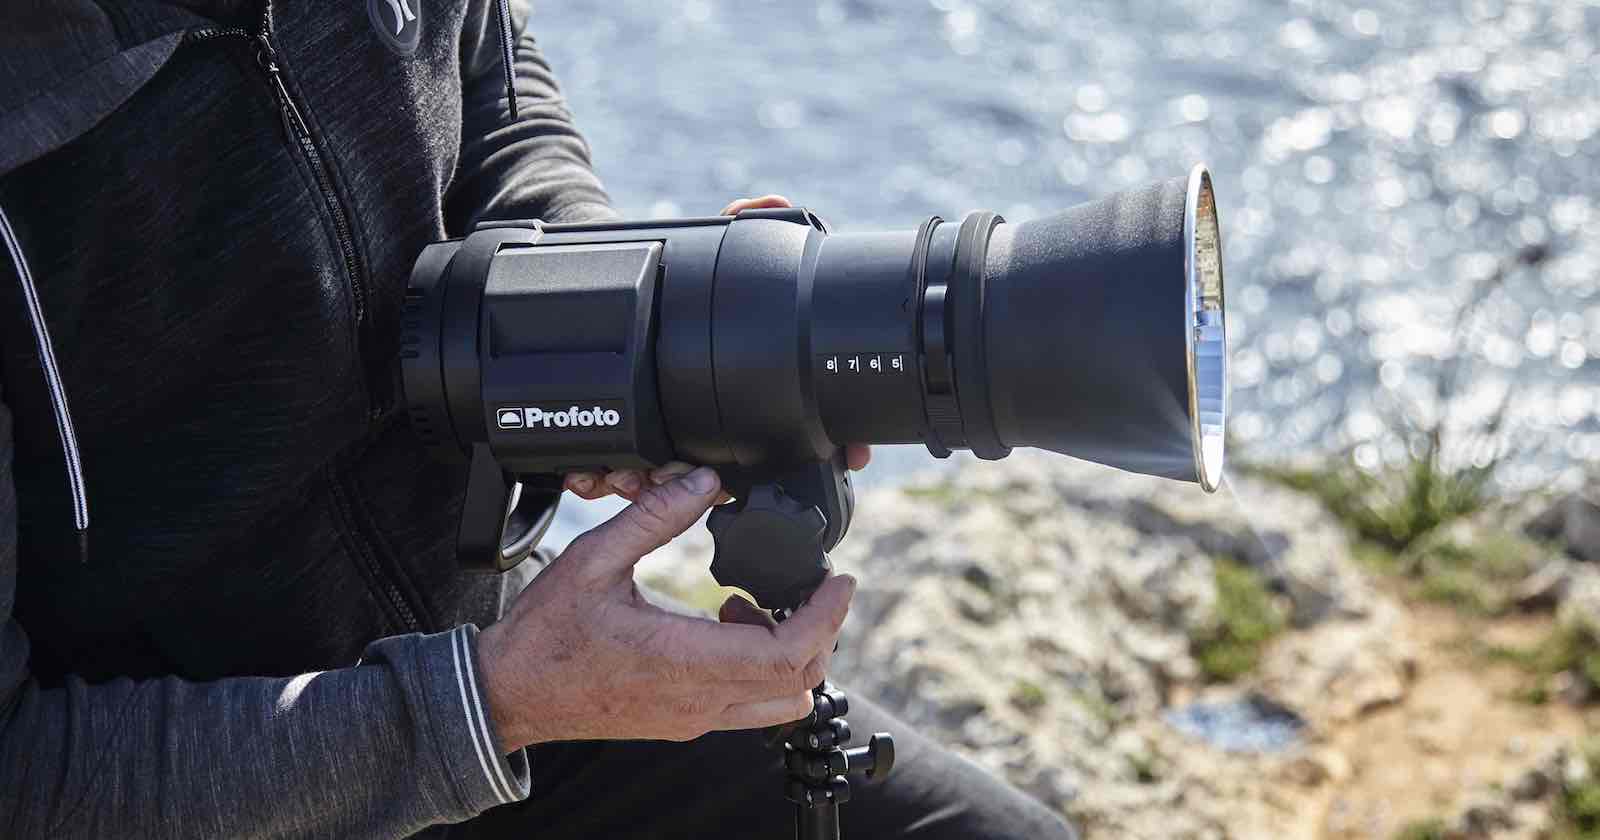 The New Profoto B1X Improves on the B1 with Power, Power, and More Power